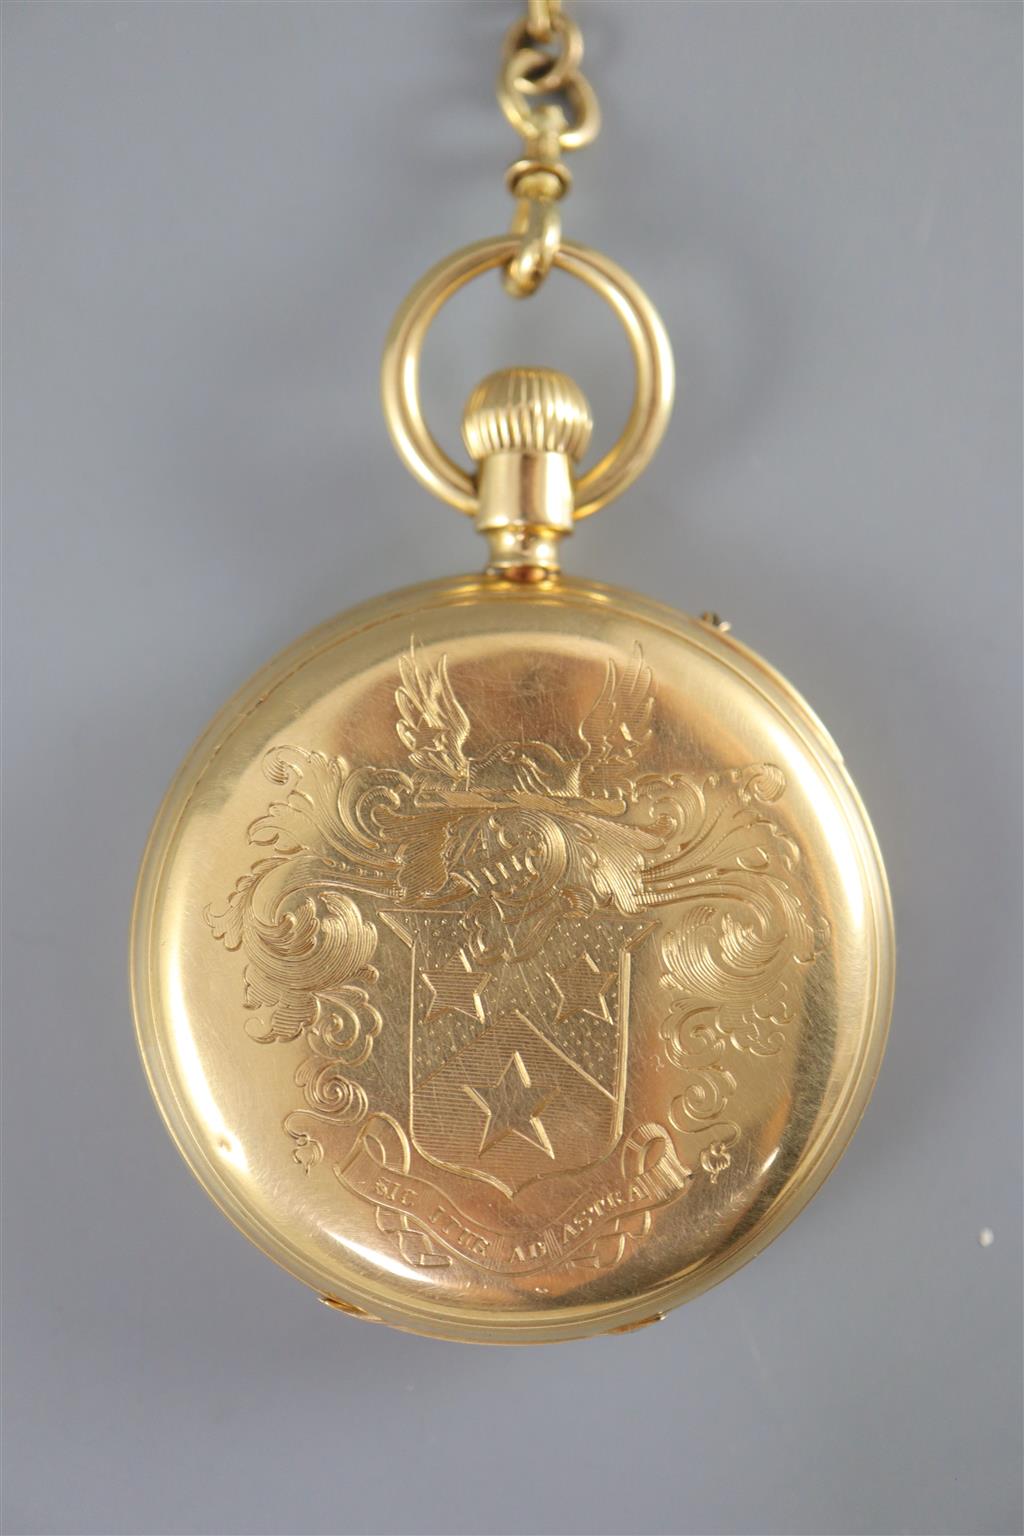 A Victorian 18ct gold open face keyless pocket watch by Mme Lind? 255 Oxford Circus Regent St.